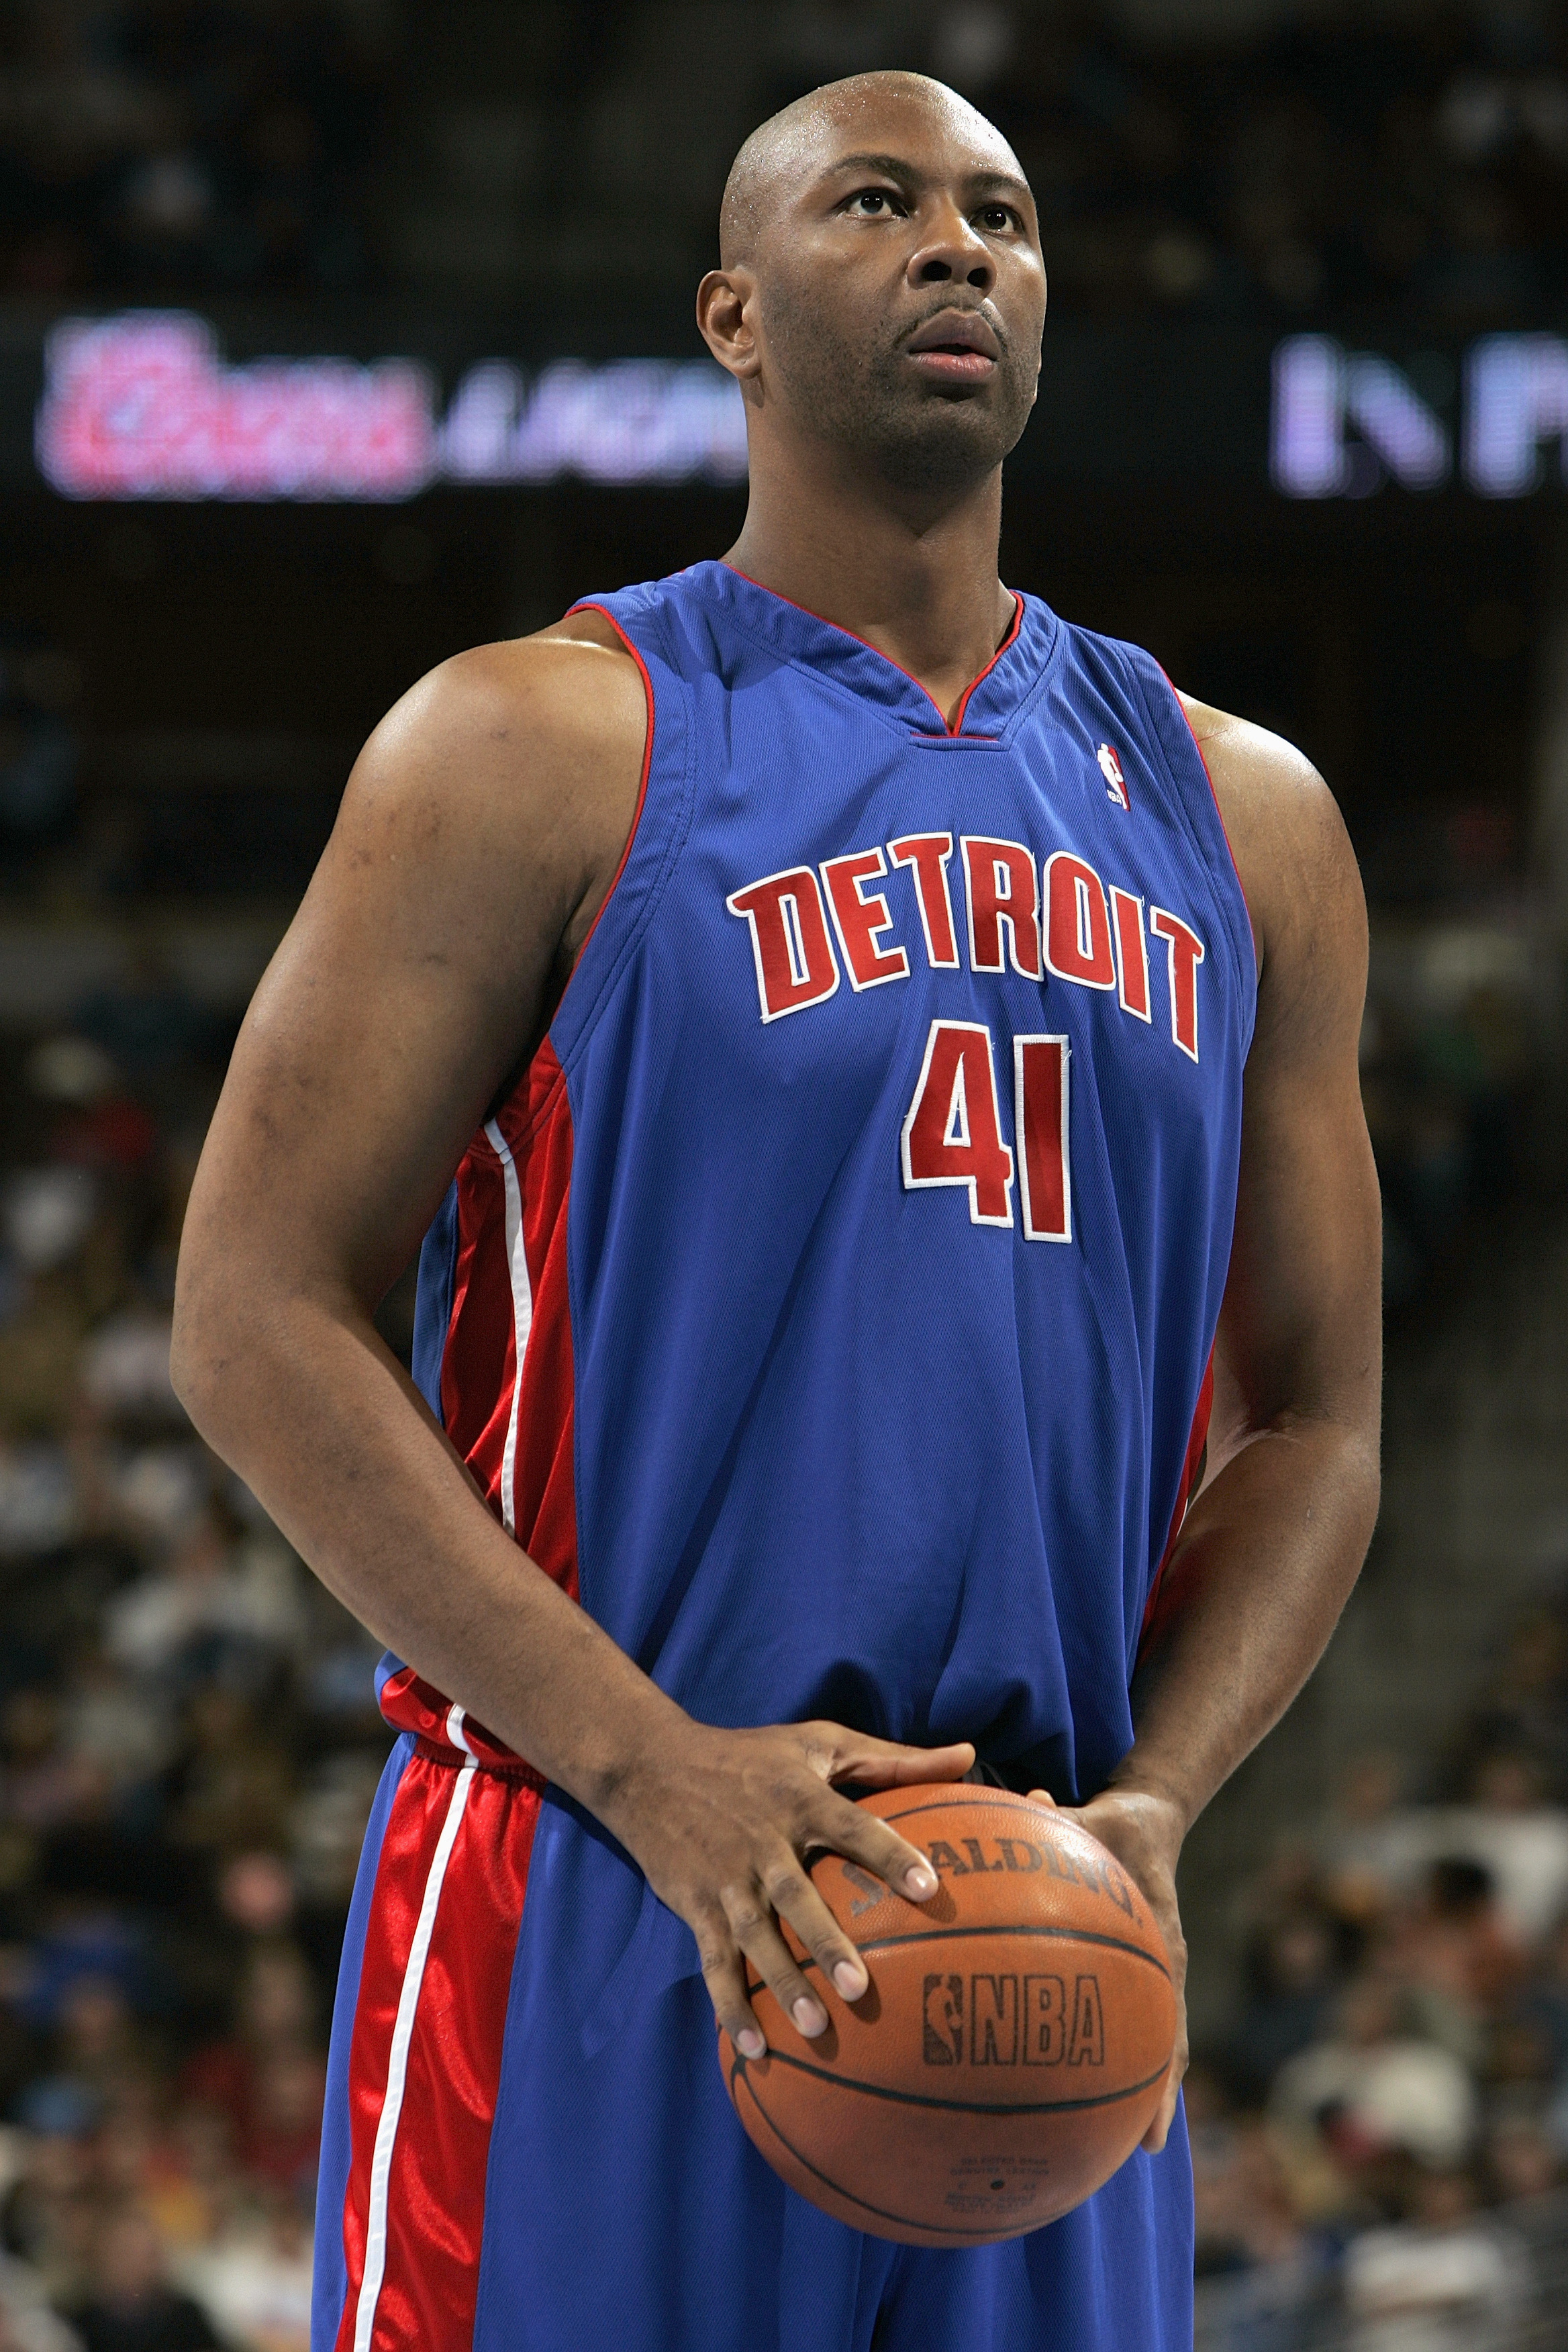 DENVER - NOVEMBER 11:  Elden Campbell #41 of the Detroit Pistons stands on the court during the game with the Denver Nuggets on November 11, 2004 at the Pepsi Center in Denver, Colorado.  The Nuggets won 117-109.    NOTE TO USER: User expressly acknowledg